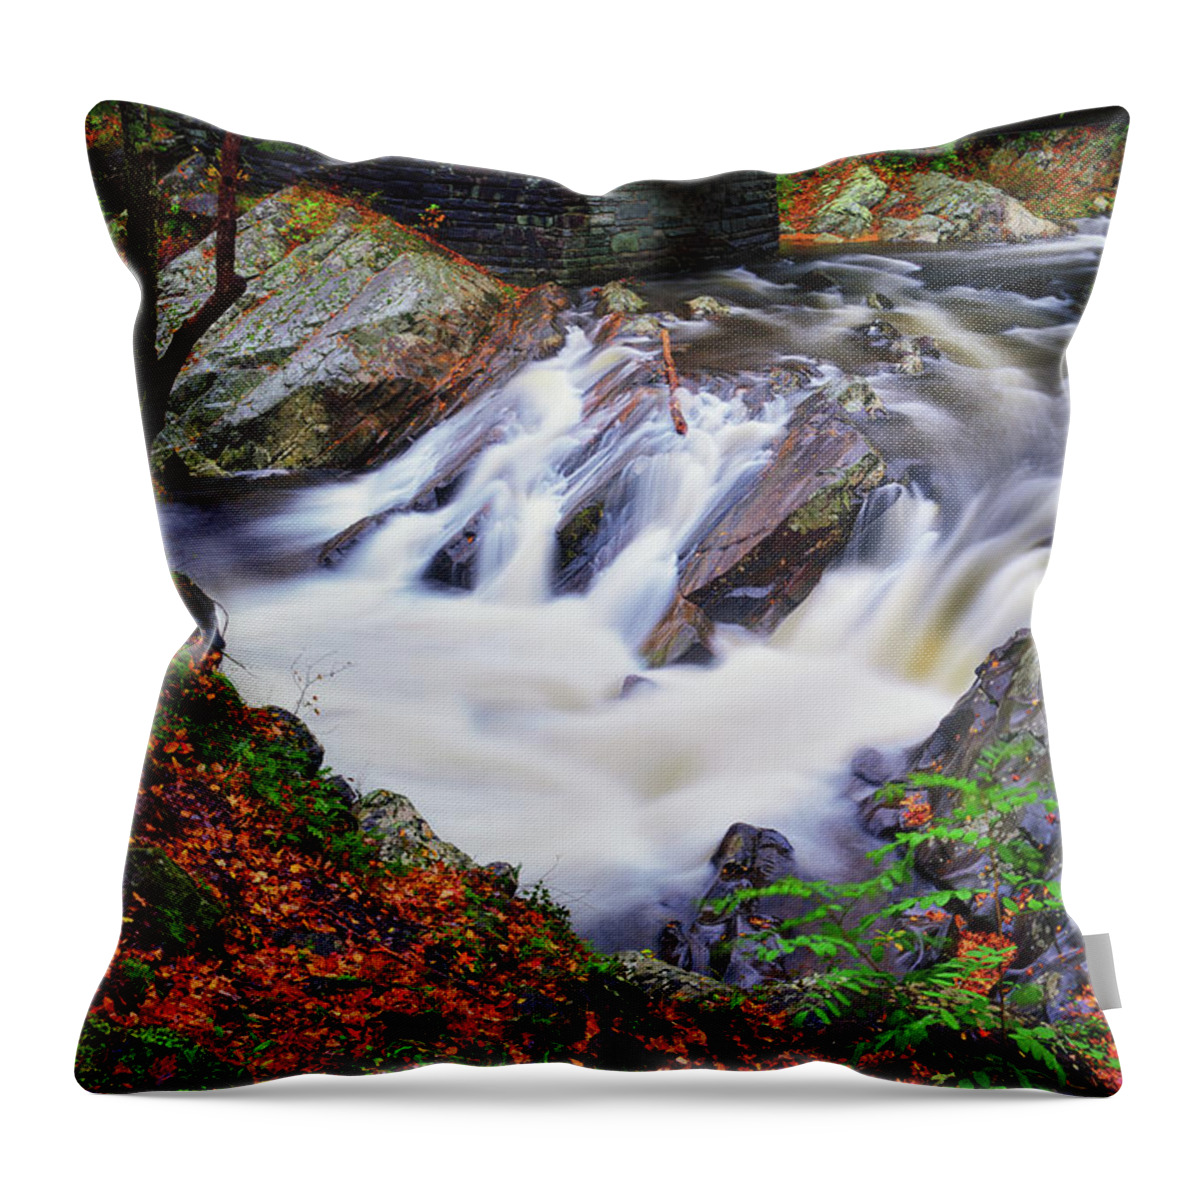 Great Smoky Mountains National Park Throw Pillow featuring the photograph Autumn at The Sinks by Greg Norrell